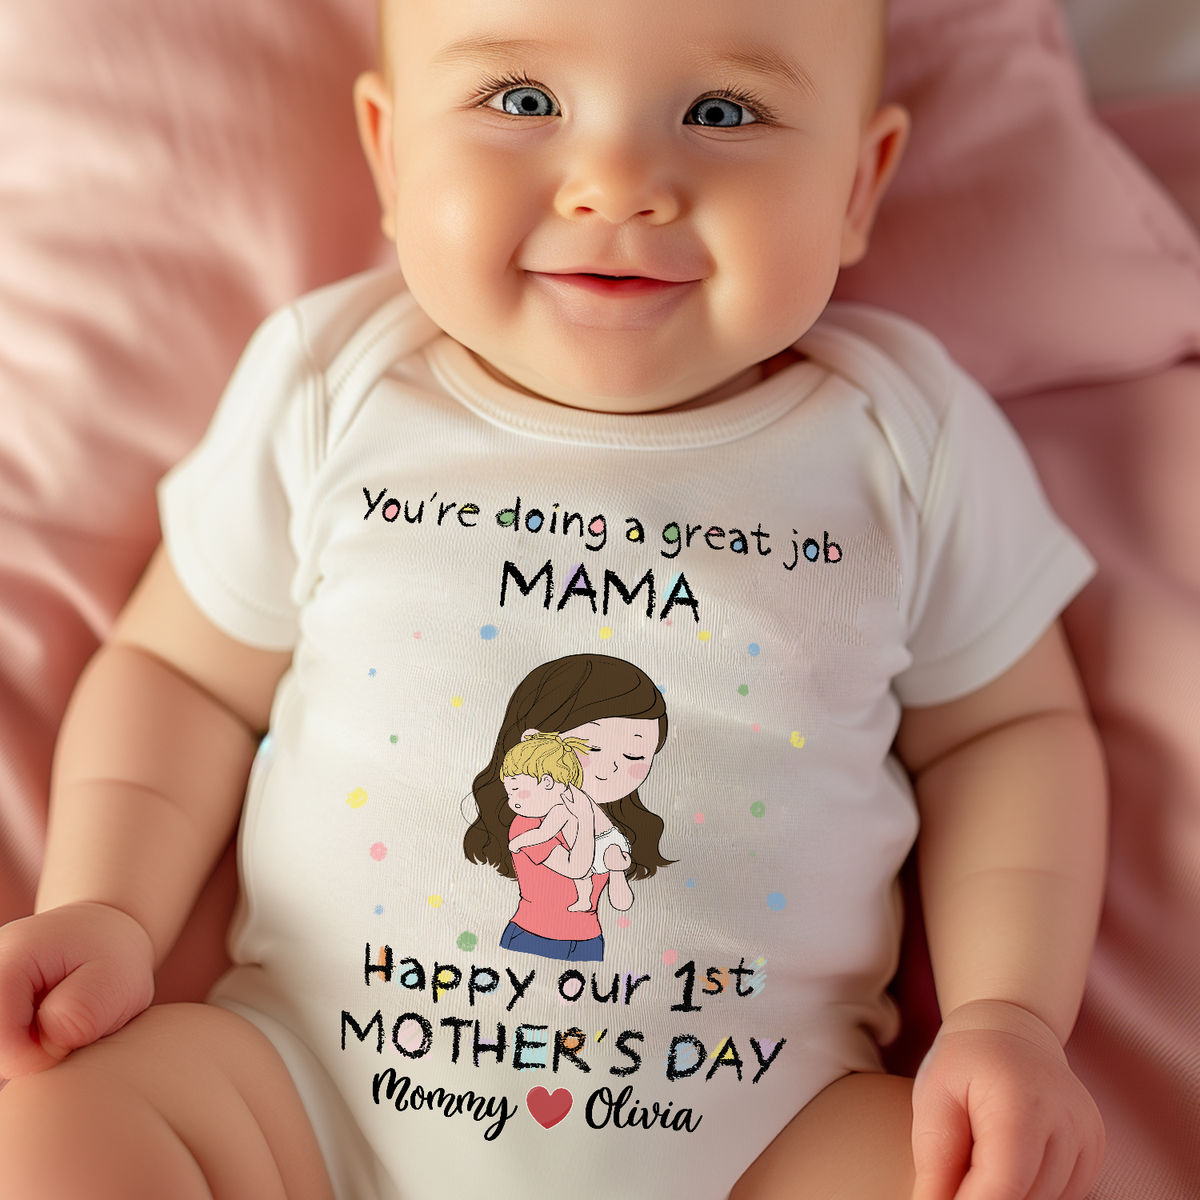 You're doing a Great Job Mama - Happy Our 1st Mother's Day